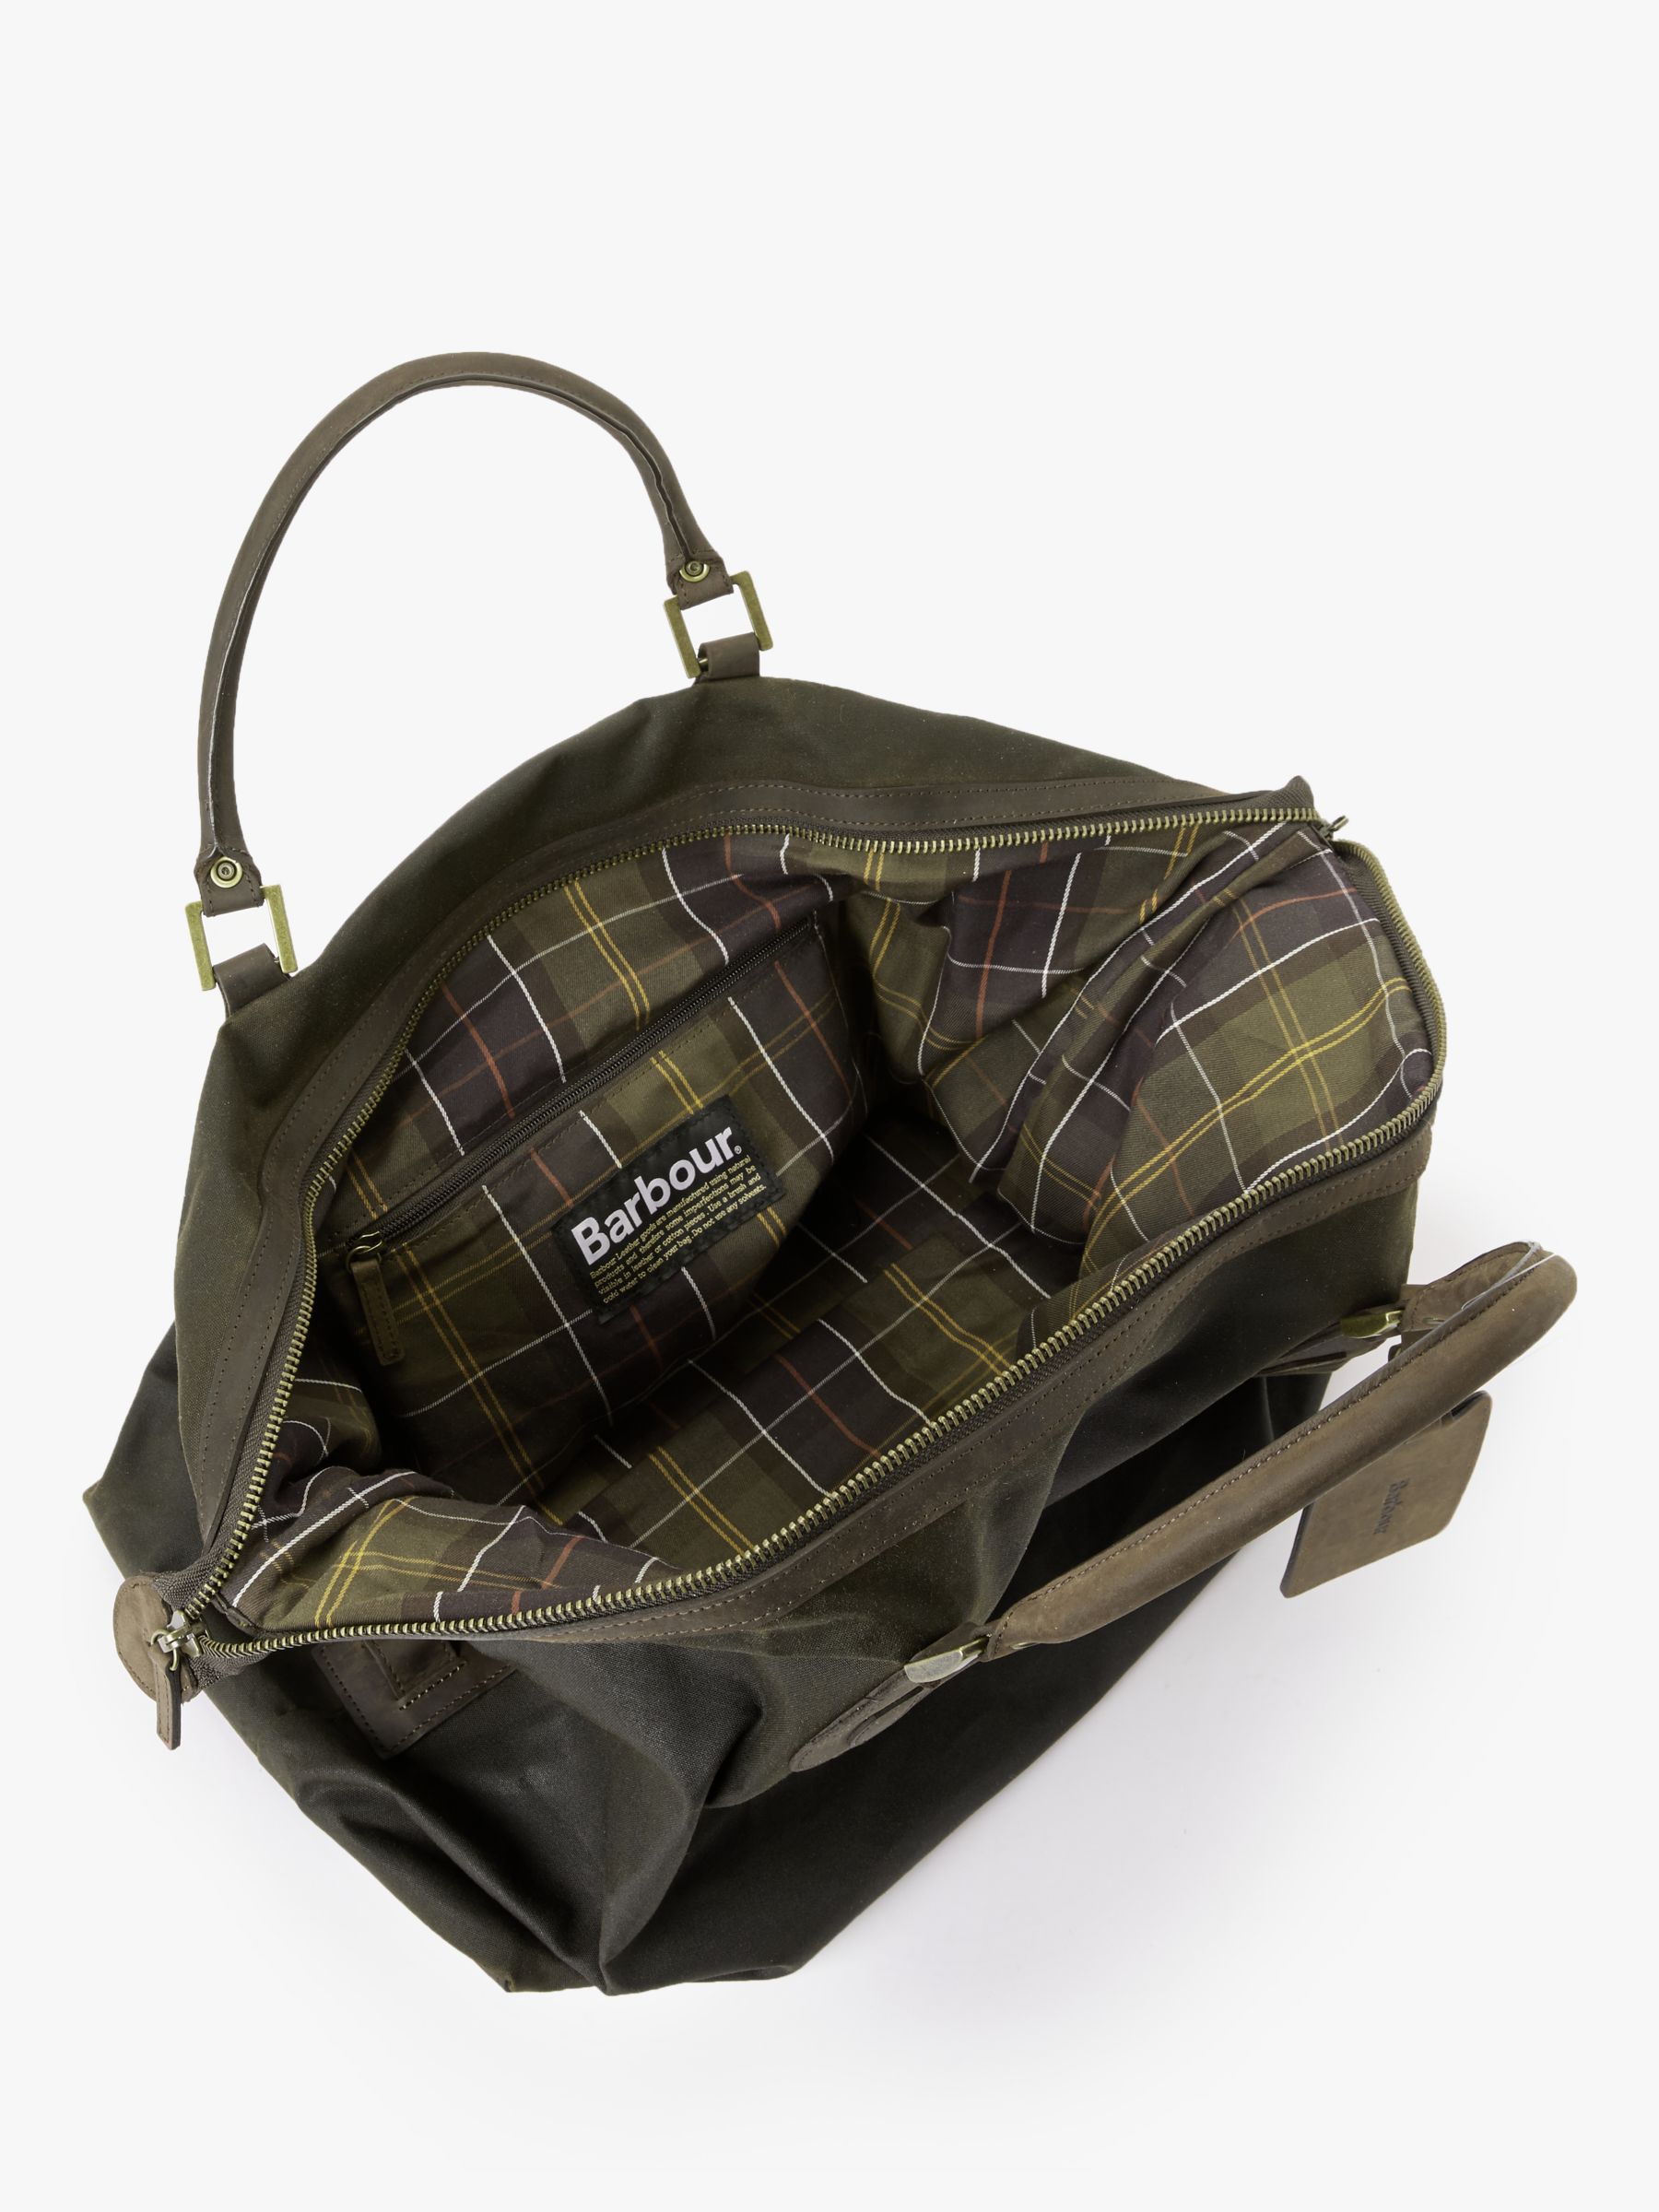 barbour holdall sale